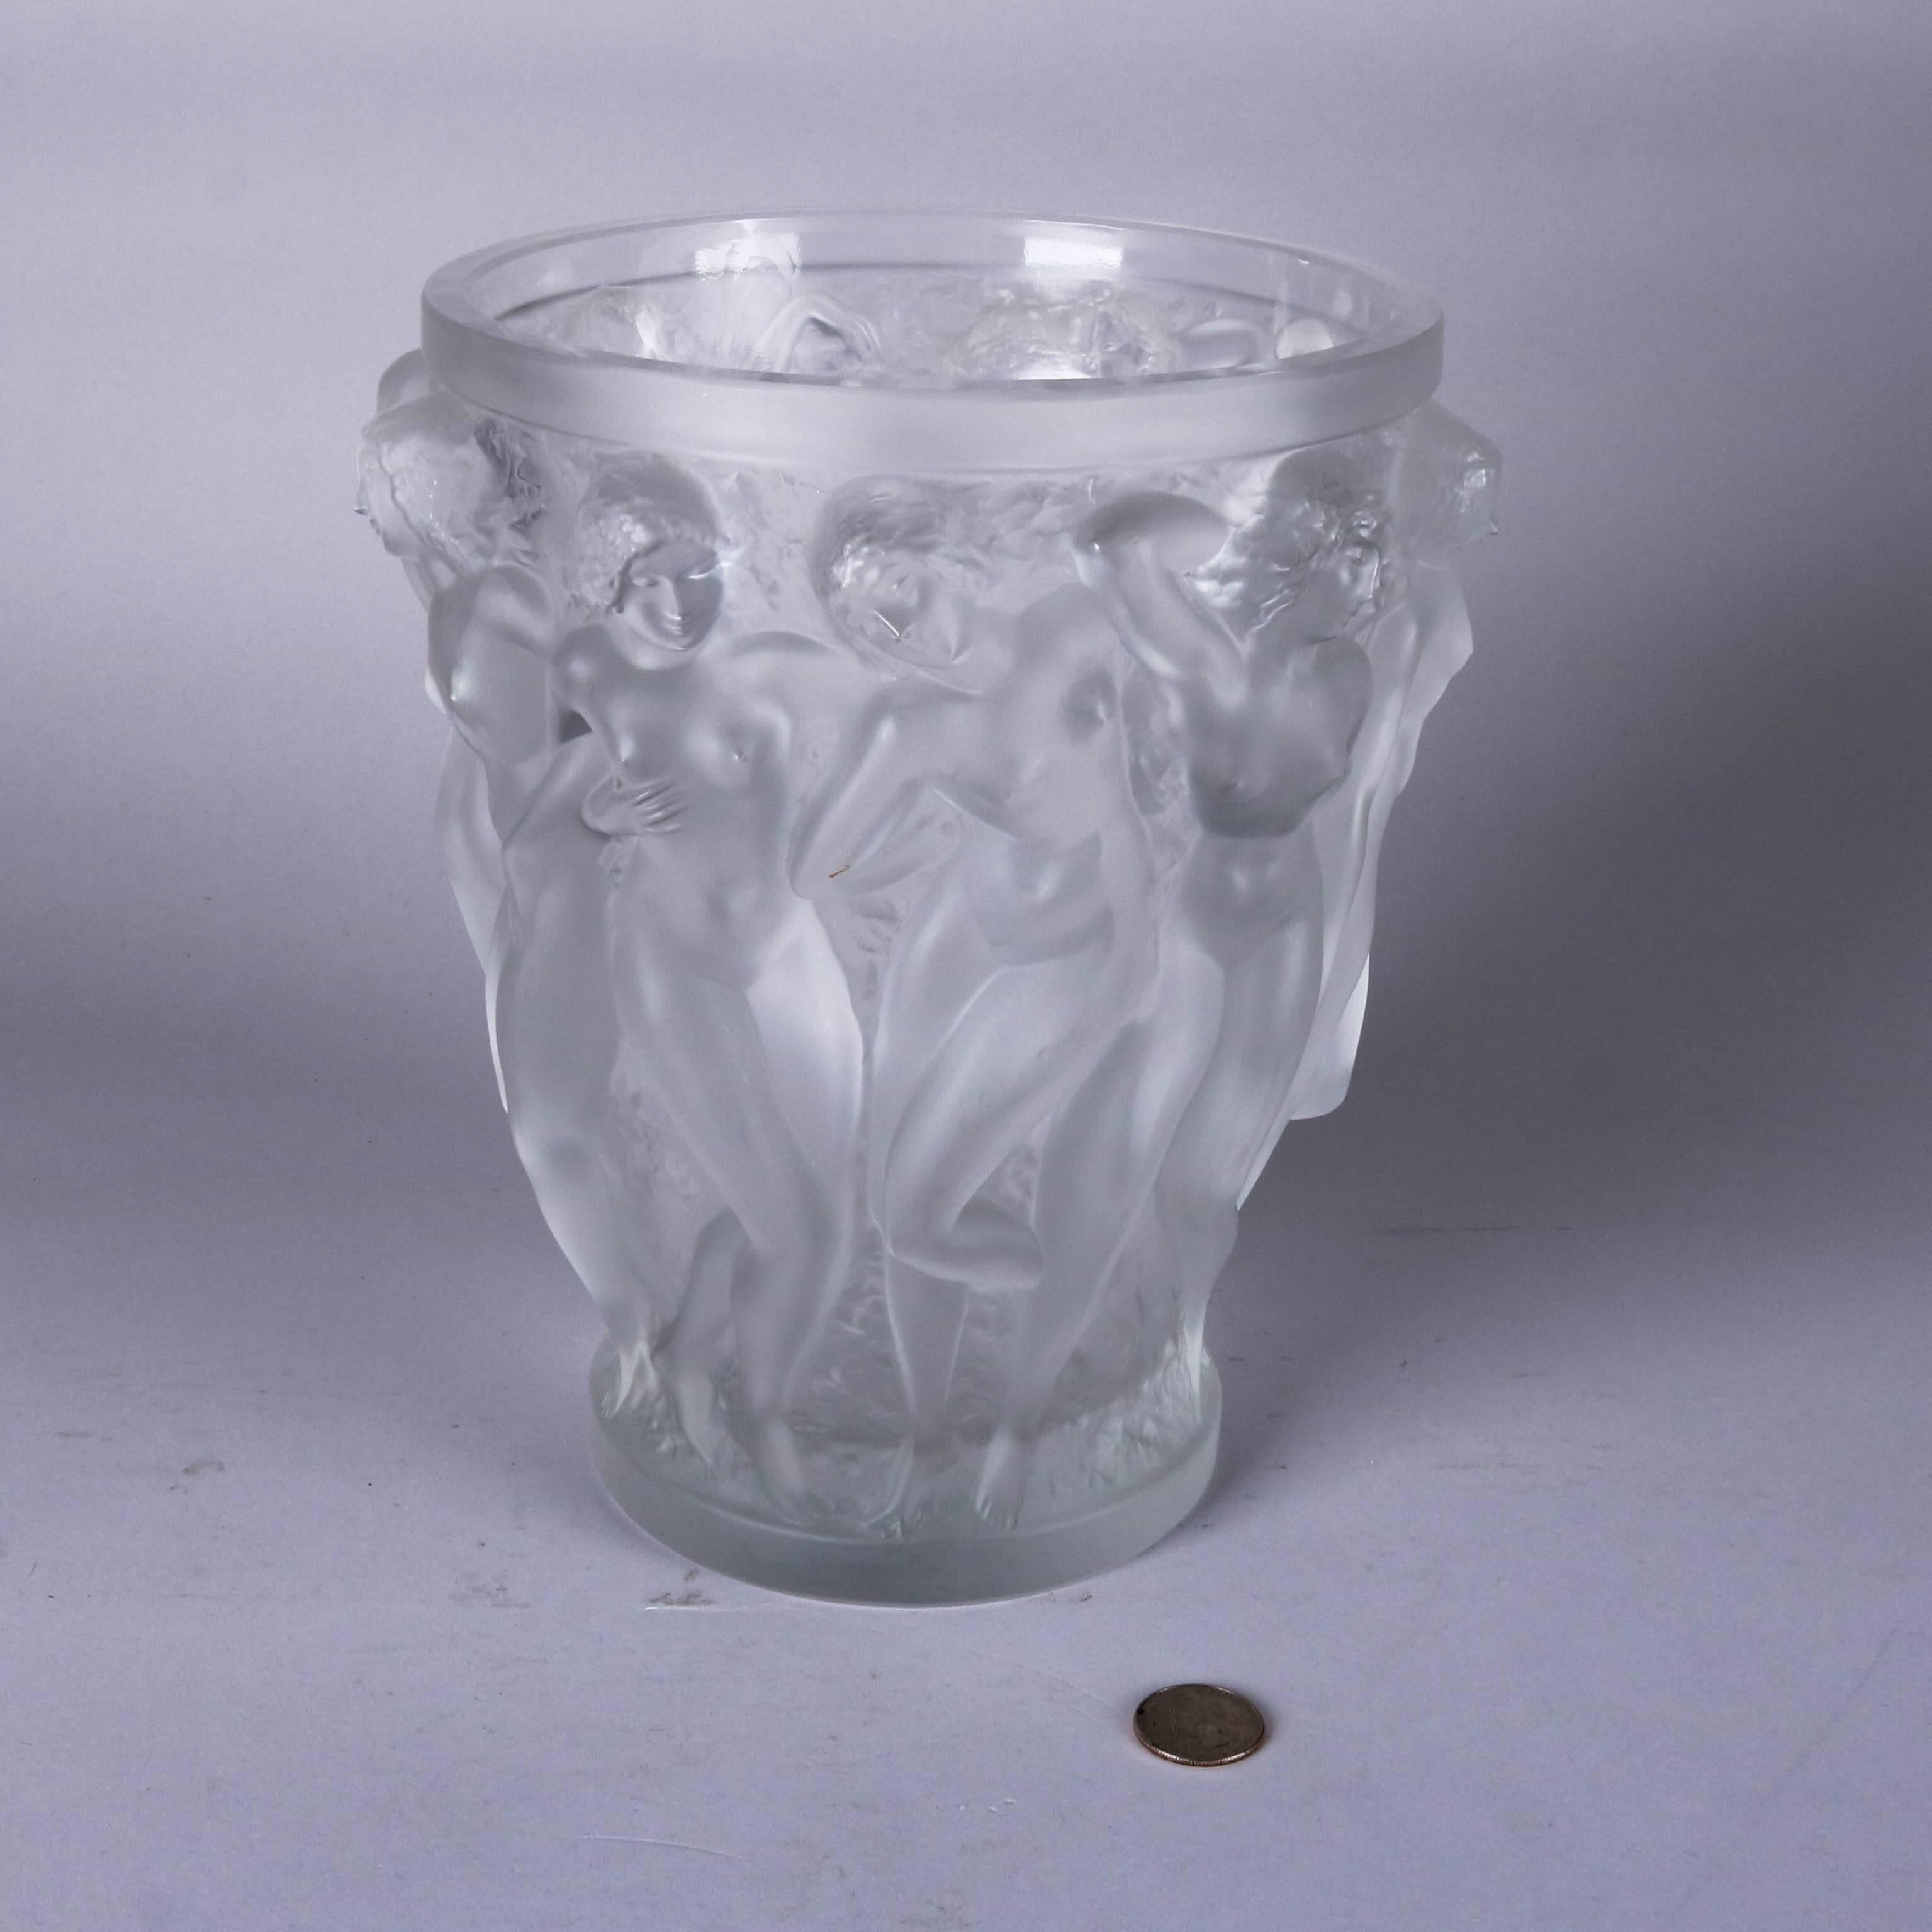 Lalique lead crystal "Bacchantes" vase features high relief of women in dance "Lalique crystal FRANCE"

Measures: 9.75" H x 9" W @ W, 6.5" op, 5.25" bs.